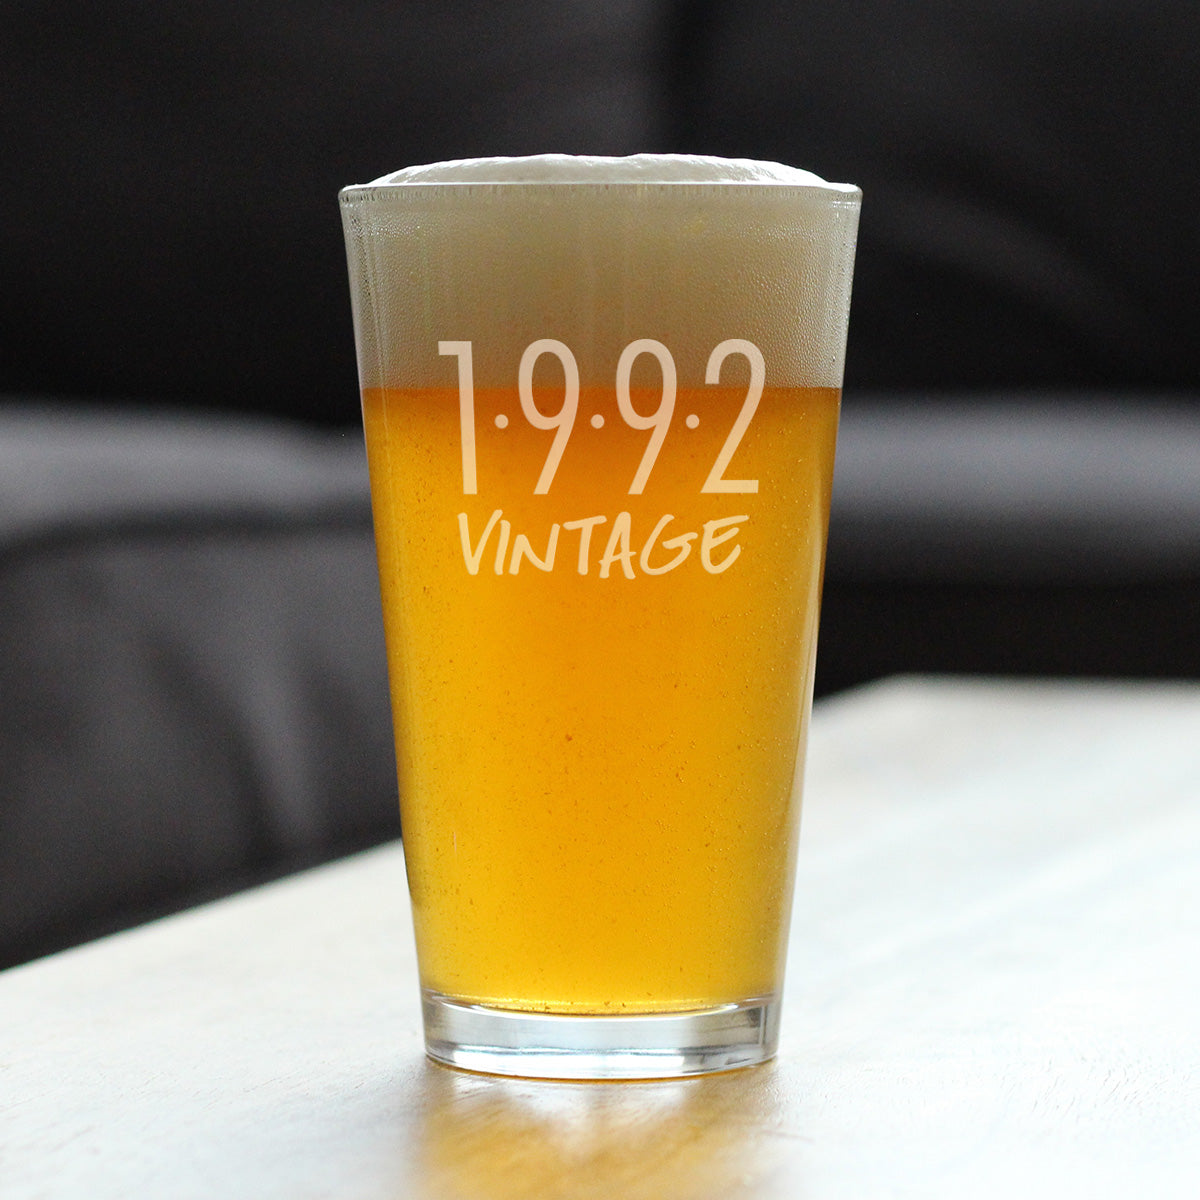 Vintage 1992 - Pint Glass for Beer - 32nd Birthday Gifts for Men or Women Turning 32 - Fun Bday Party Decor - 16 oz